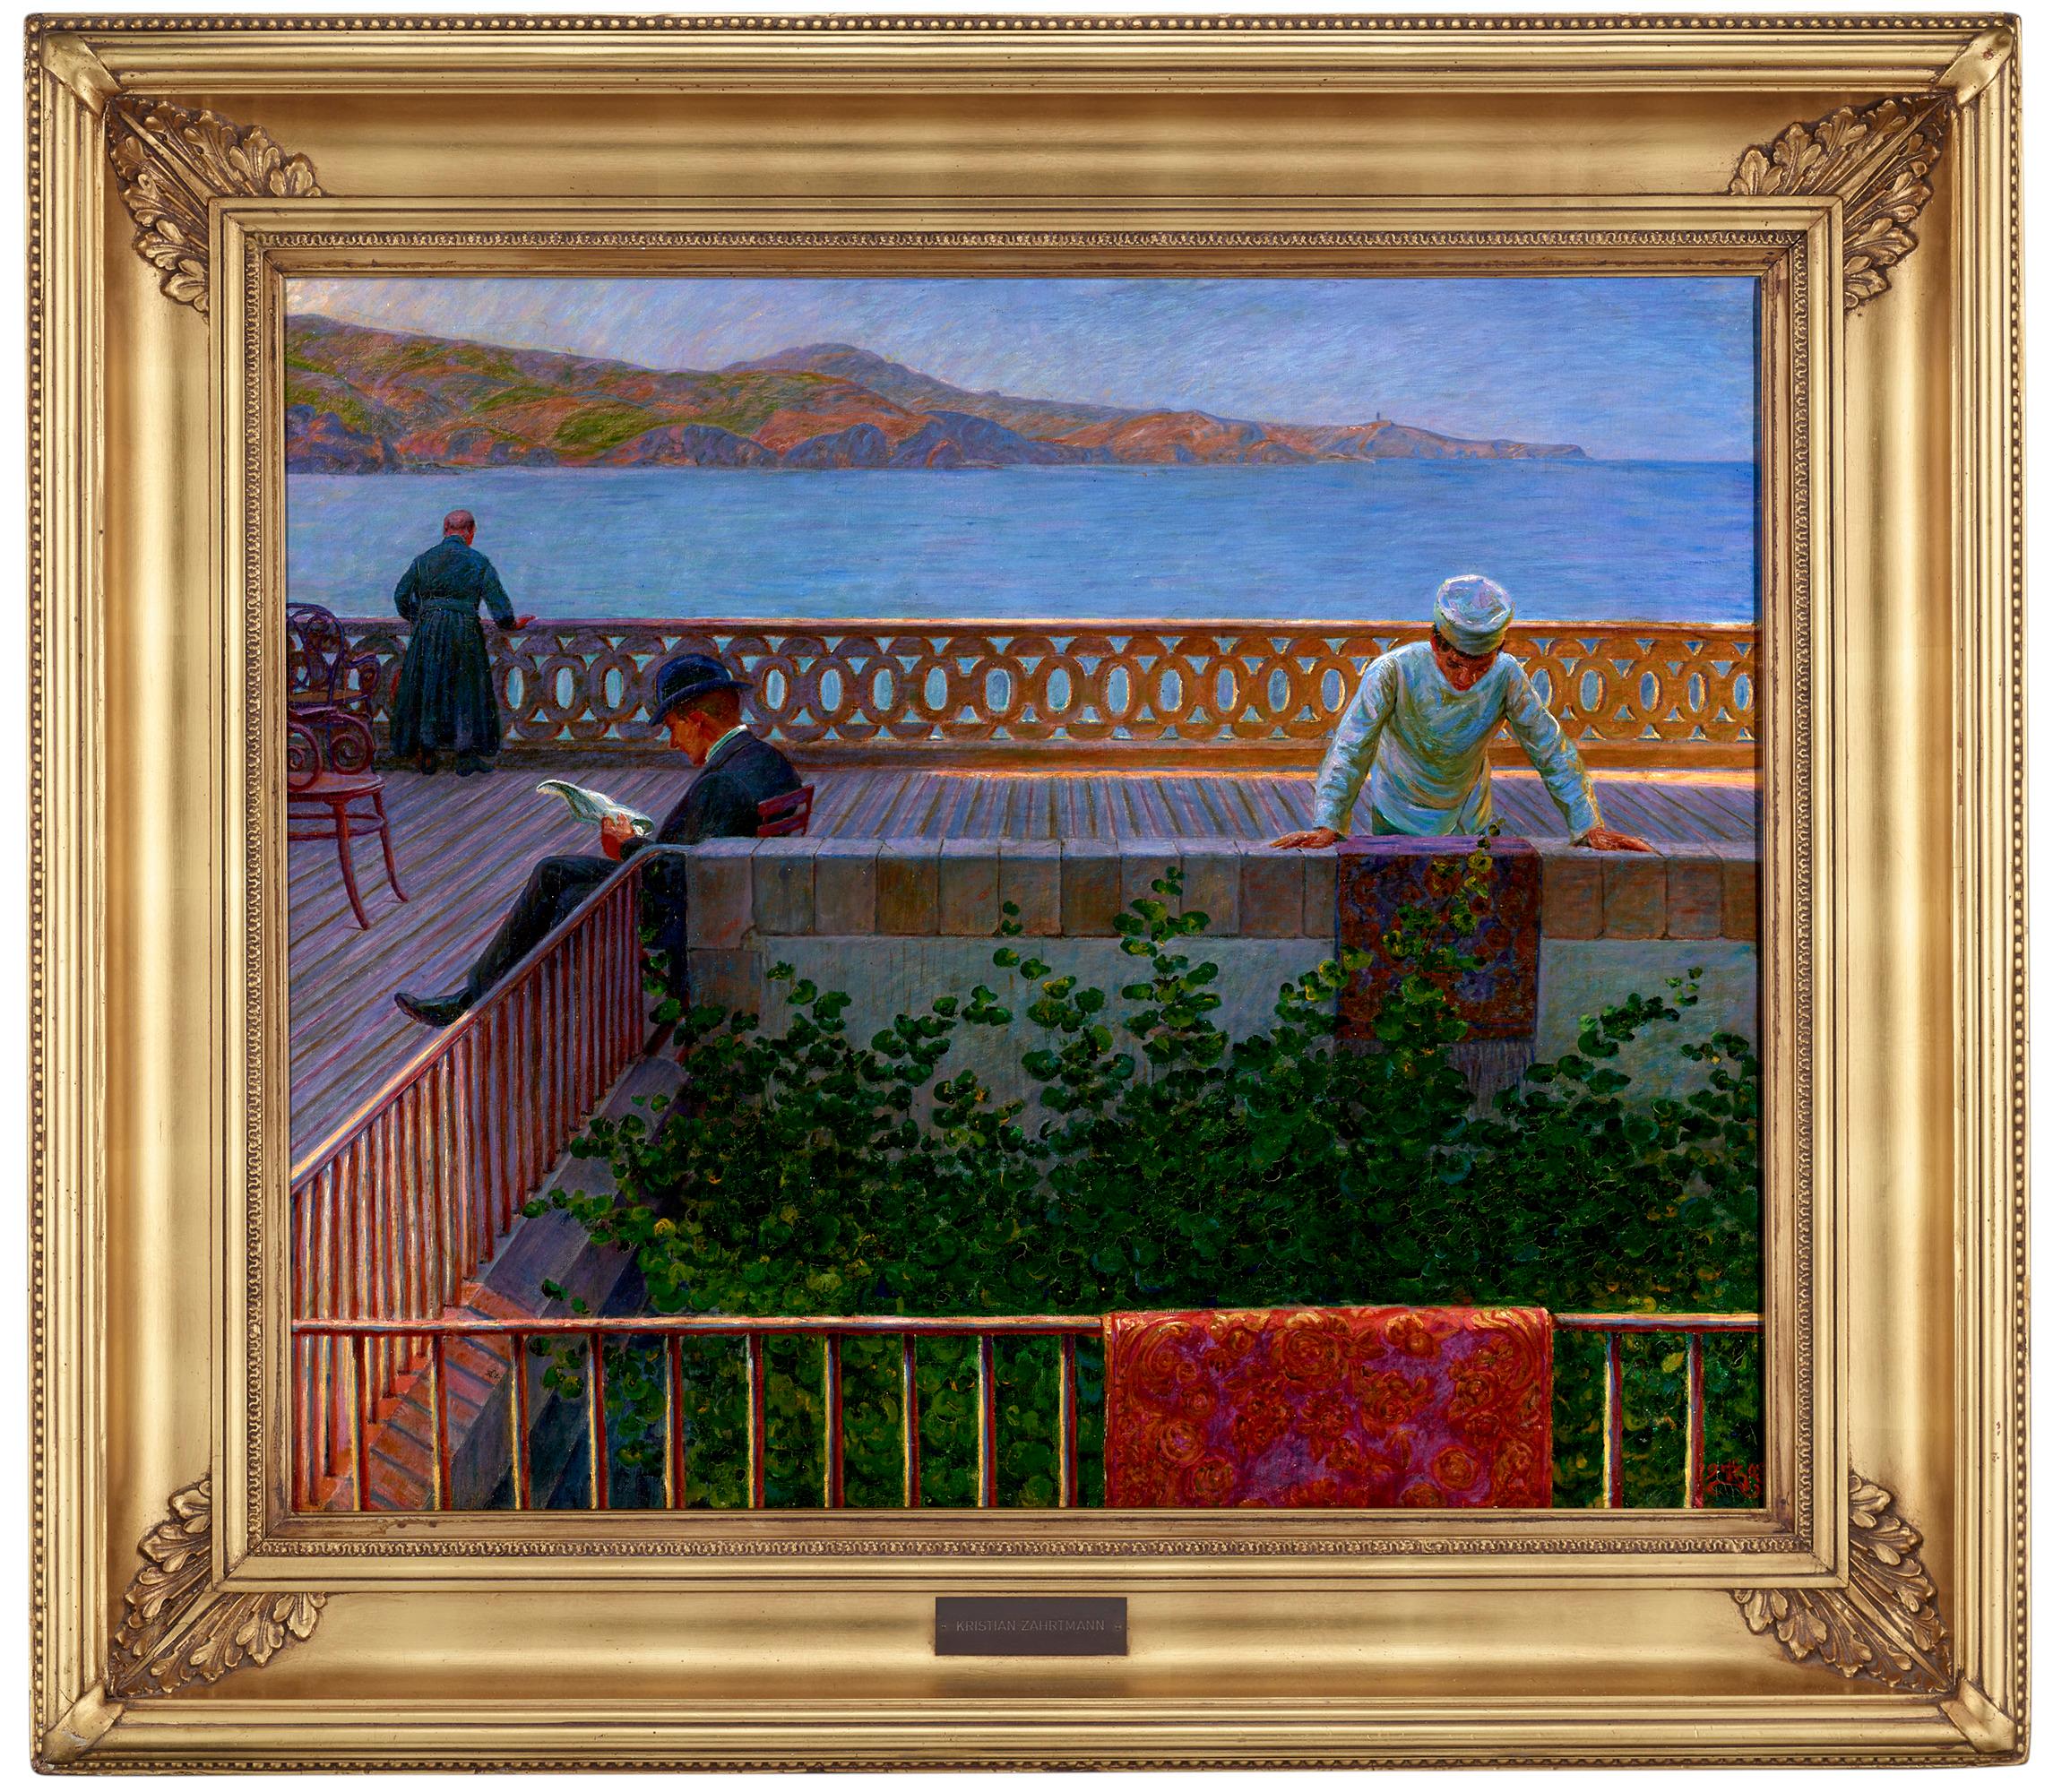 View from a Veranda in the South of France - Painting by Kristian Zahrtmann